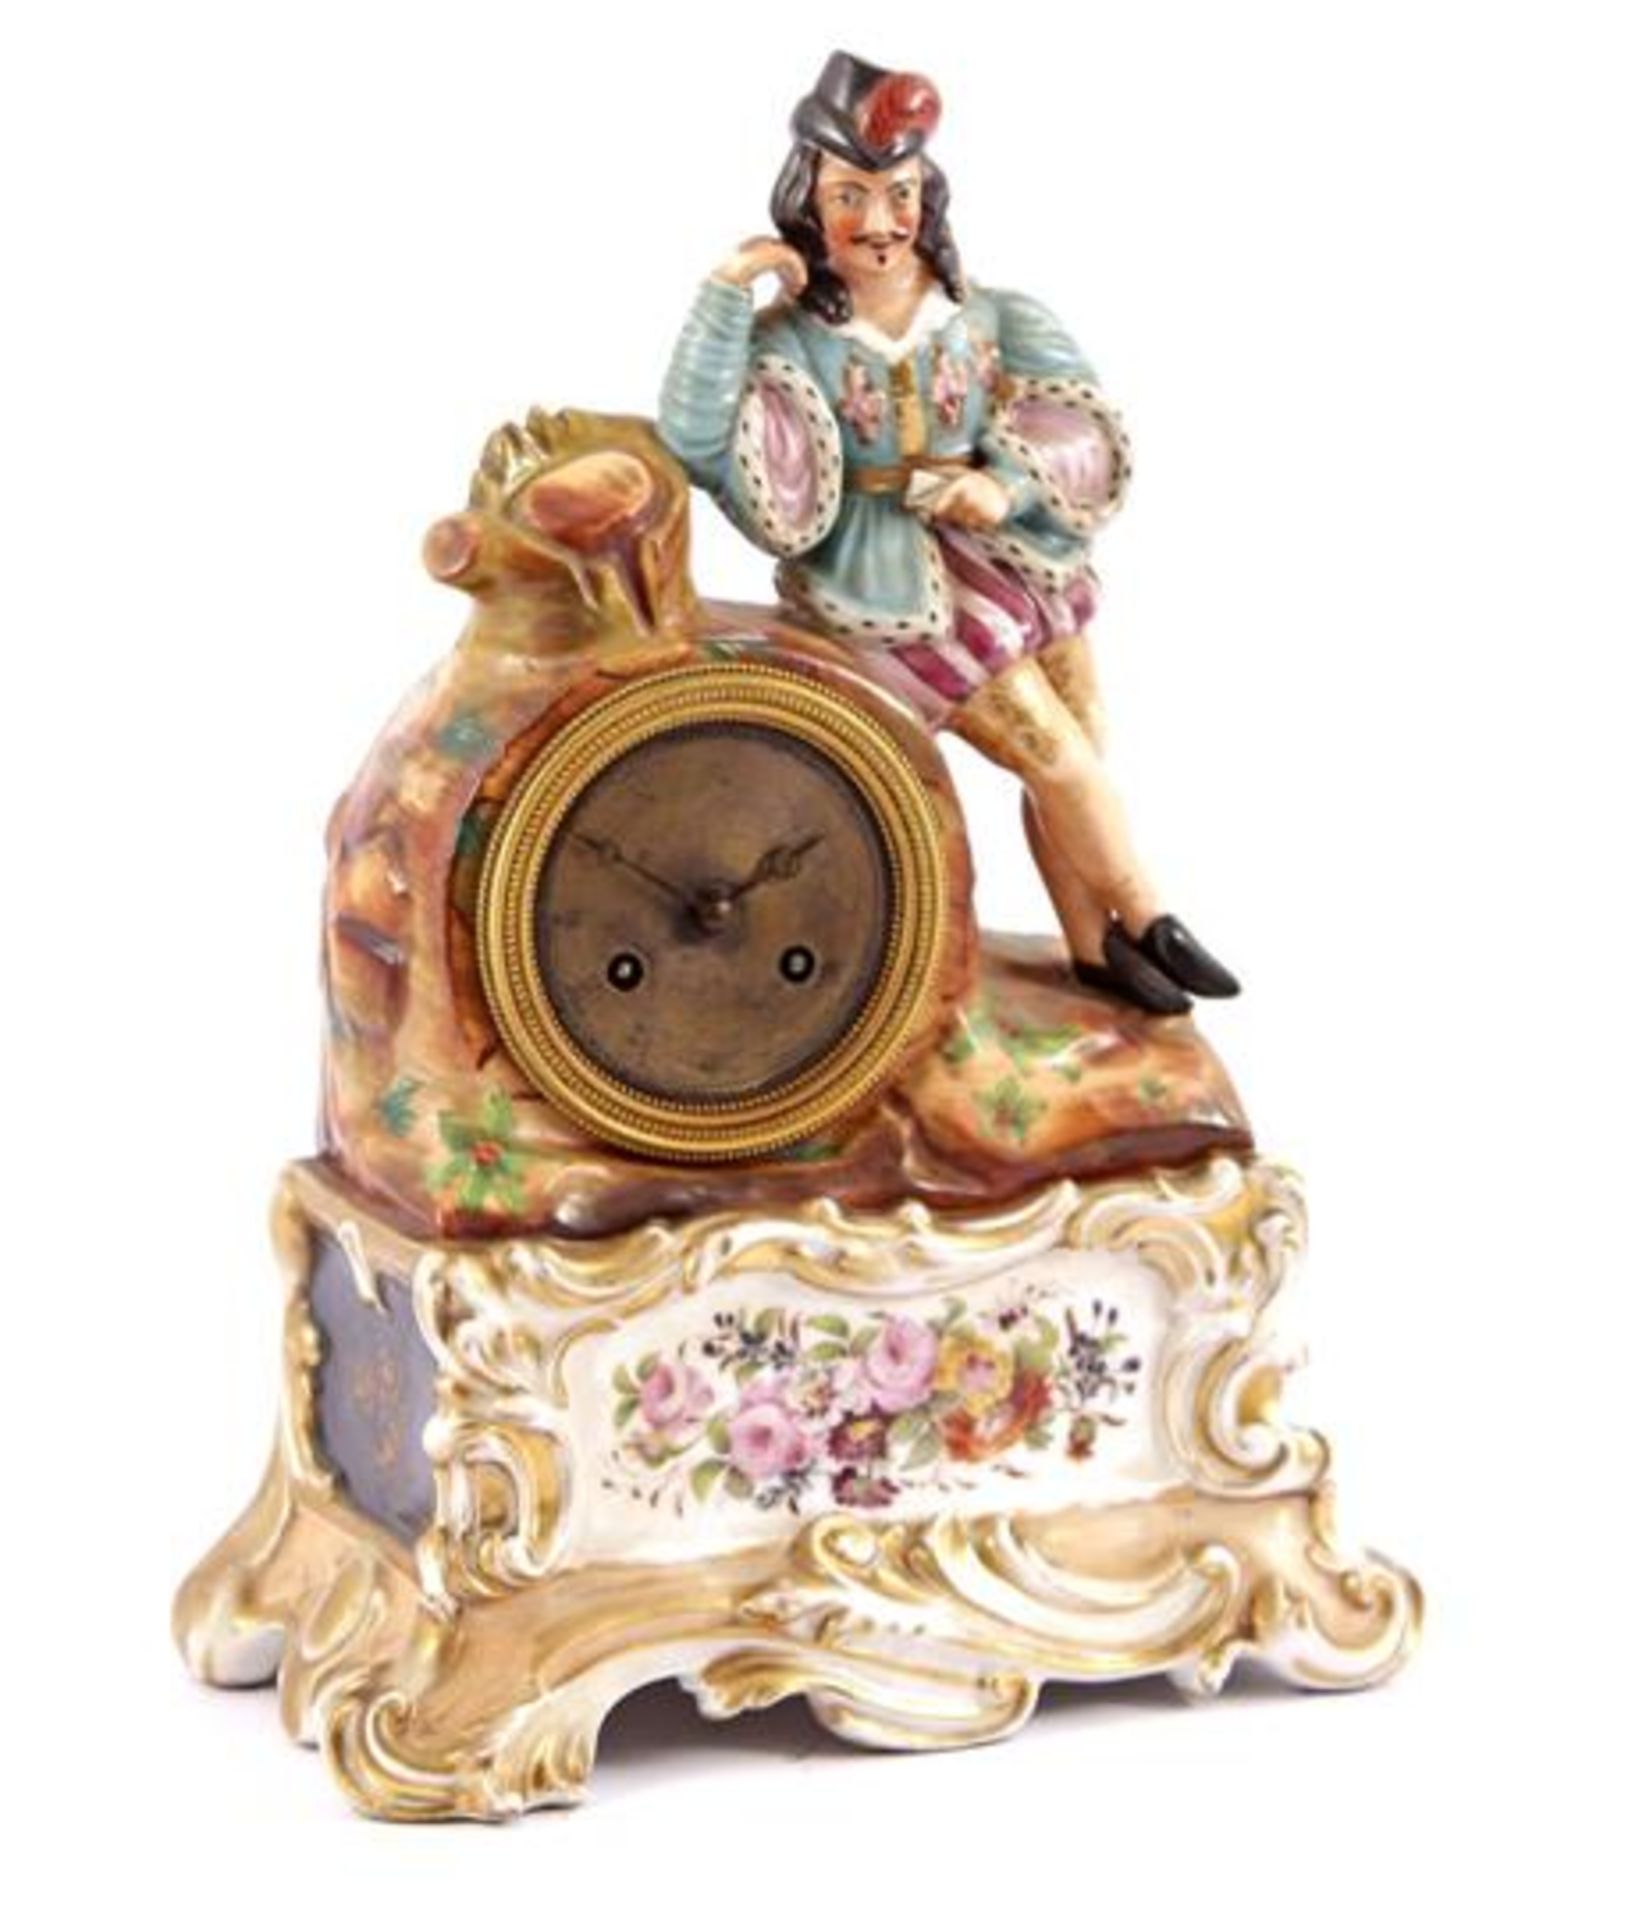 Porcelain 19th century painted table clock with man on top 32 cm high